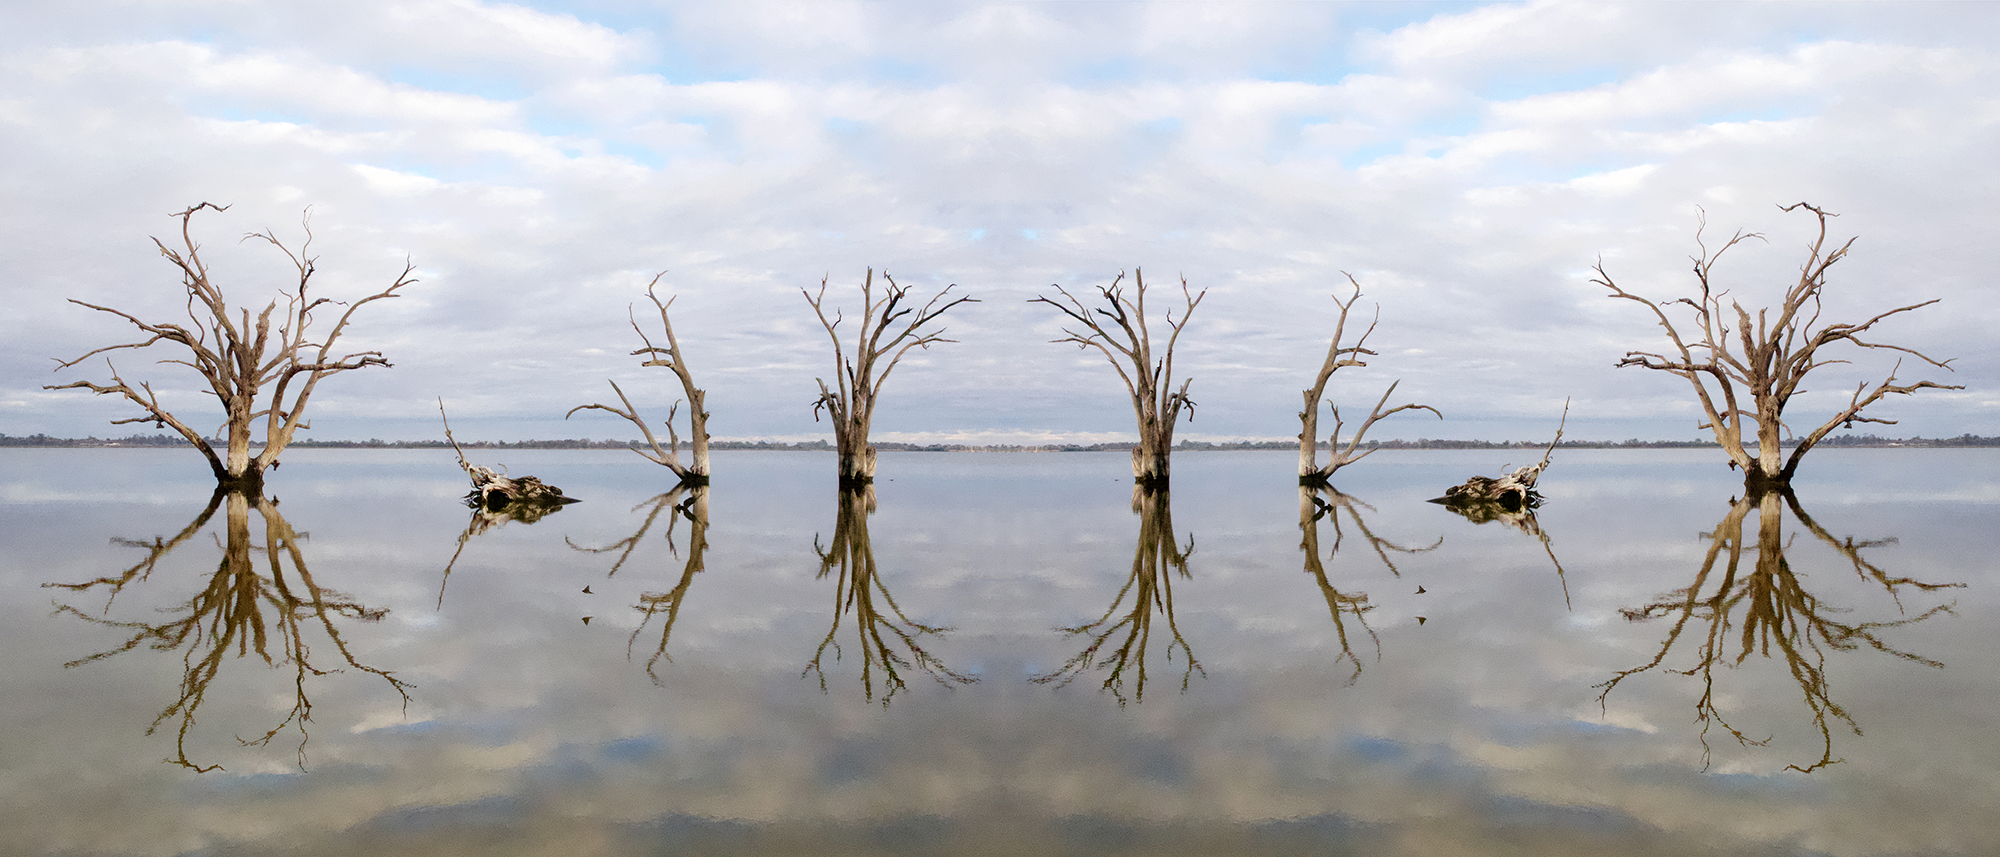 Artwork of Murray Darling lake with trees with no leaves